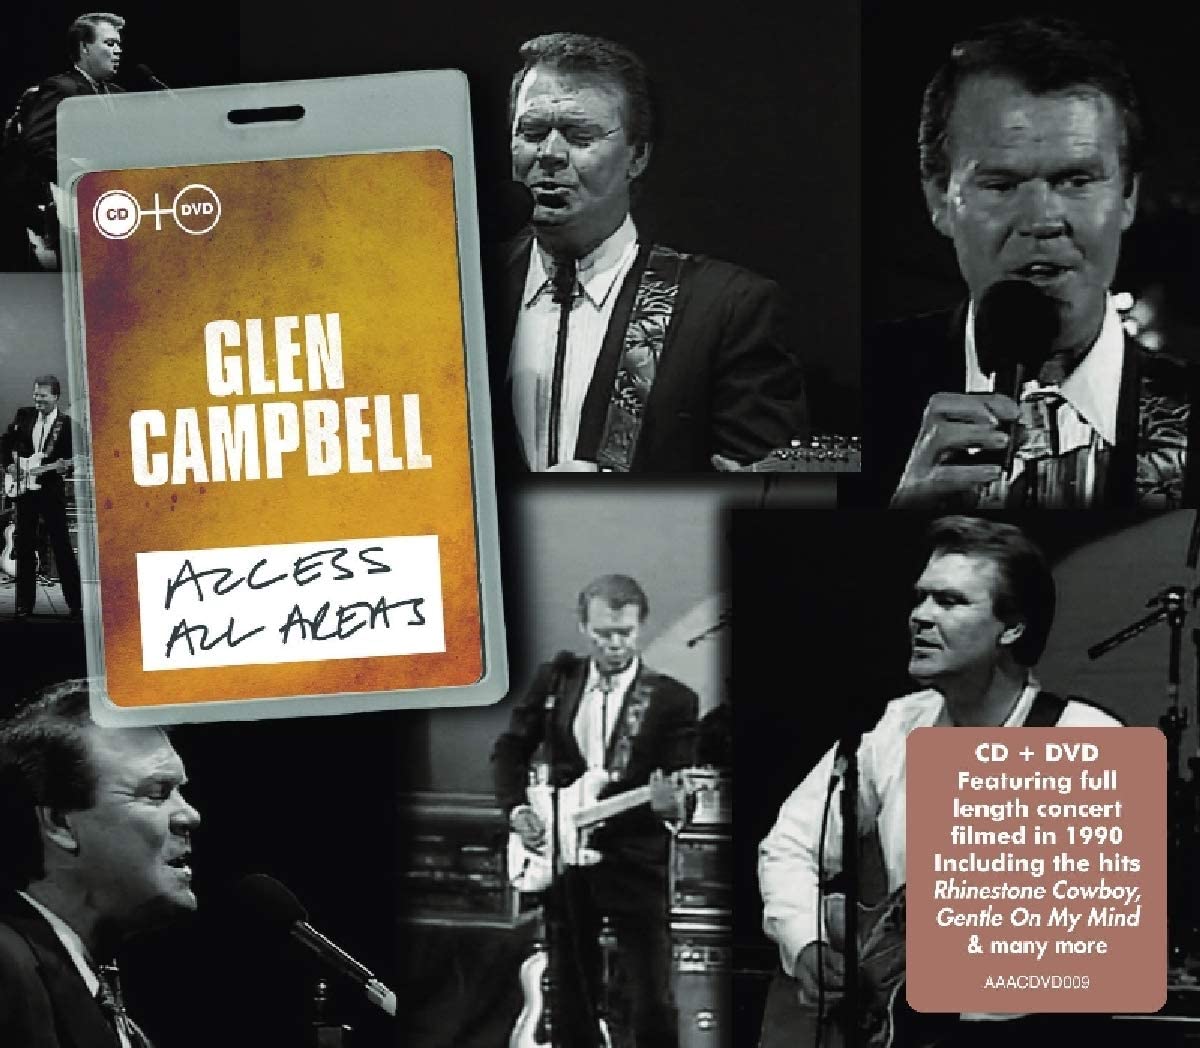 Glen Campbell - Access All Areas - CD/DVD